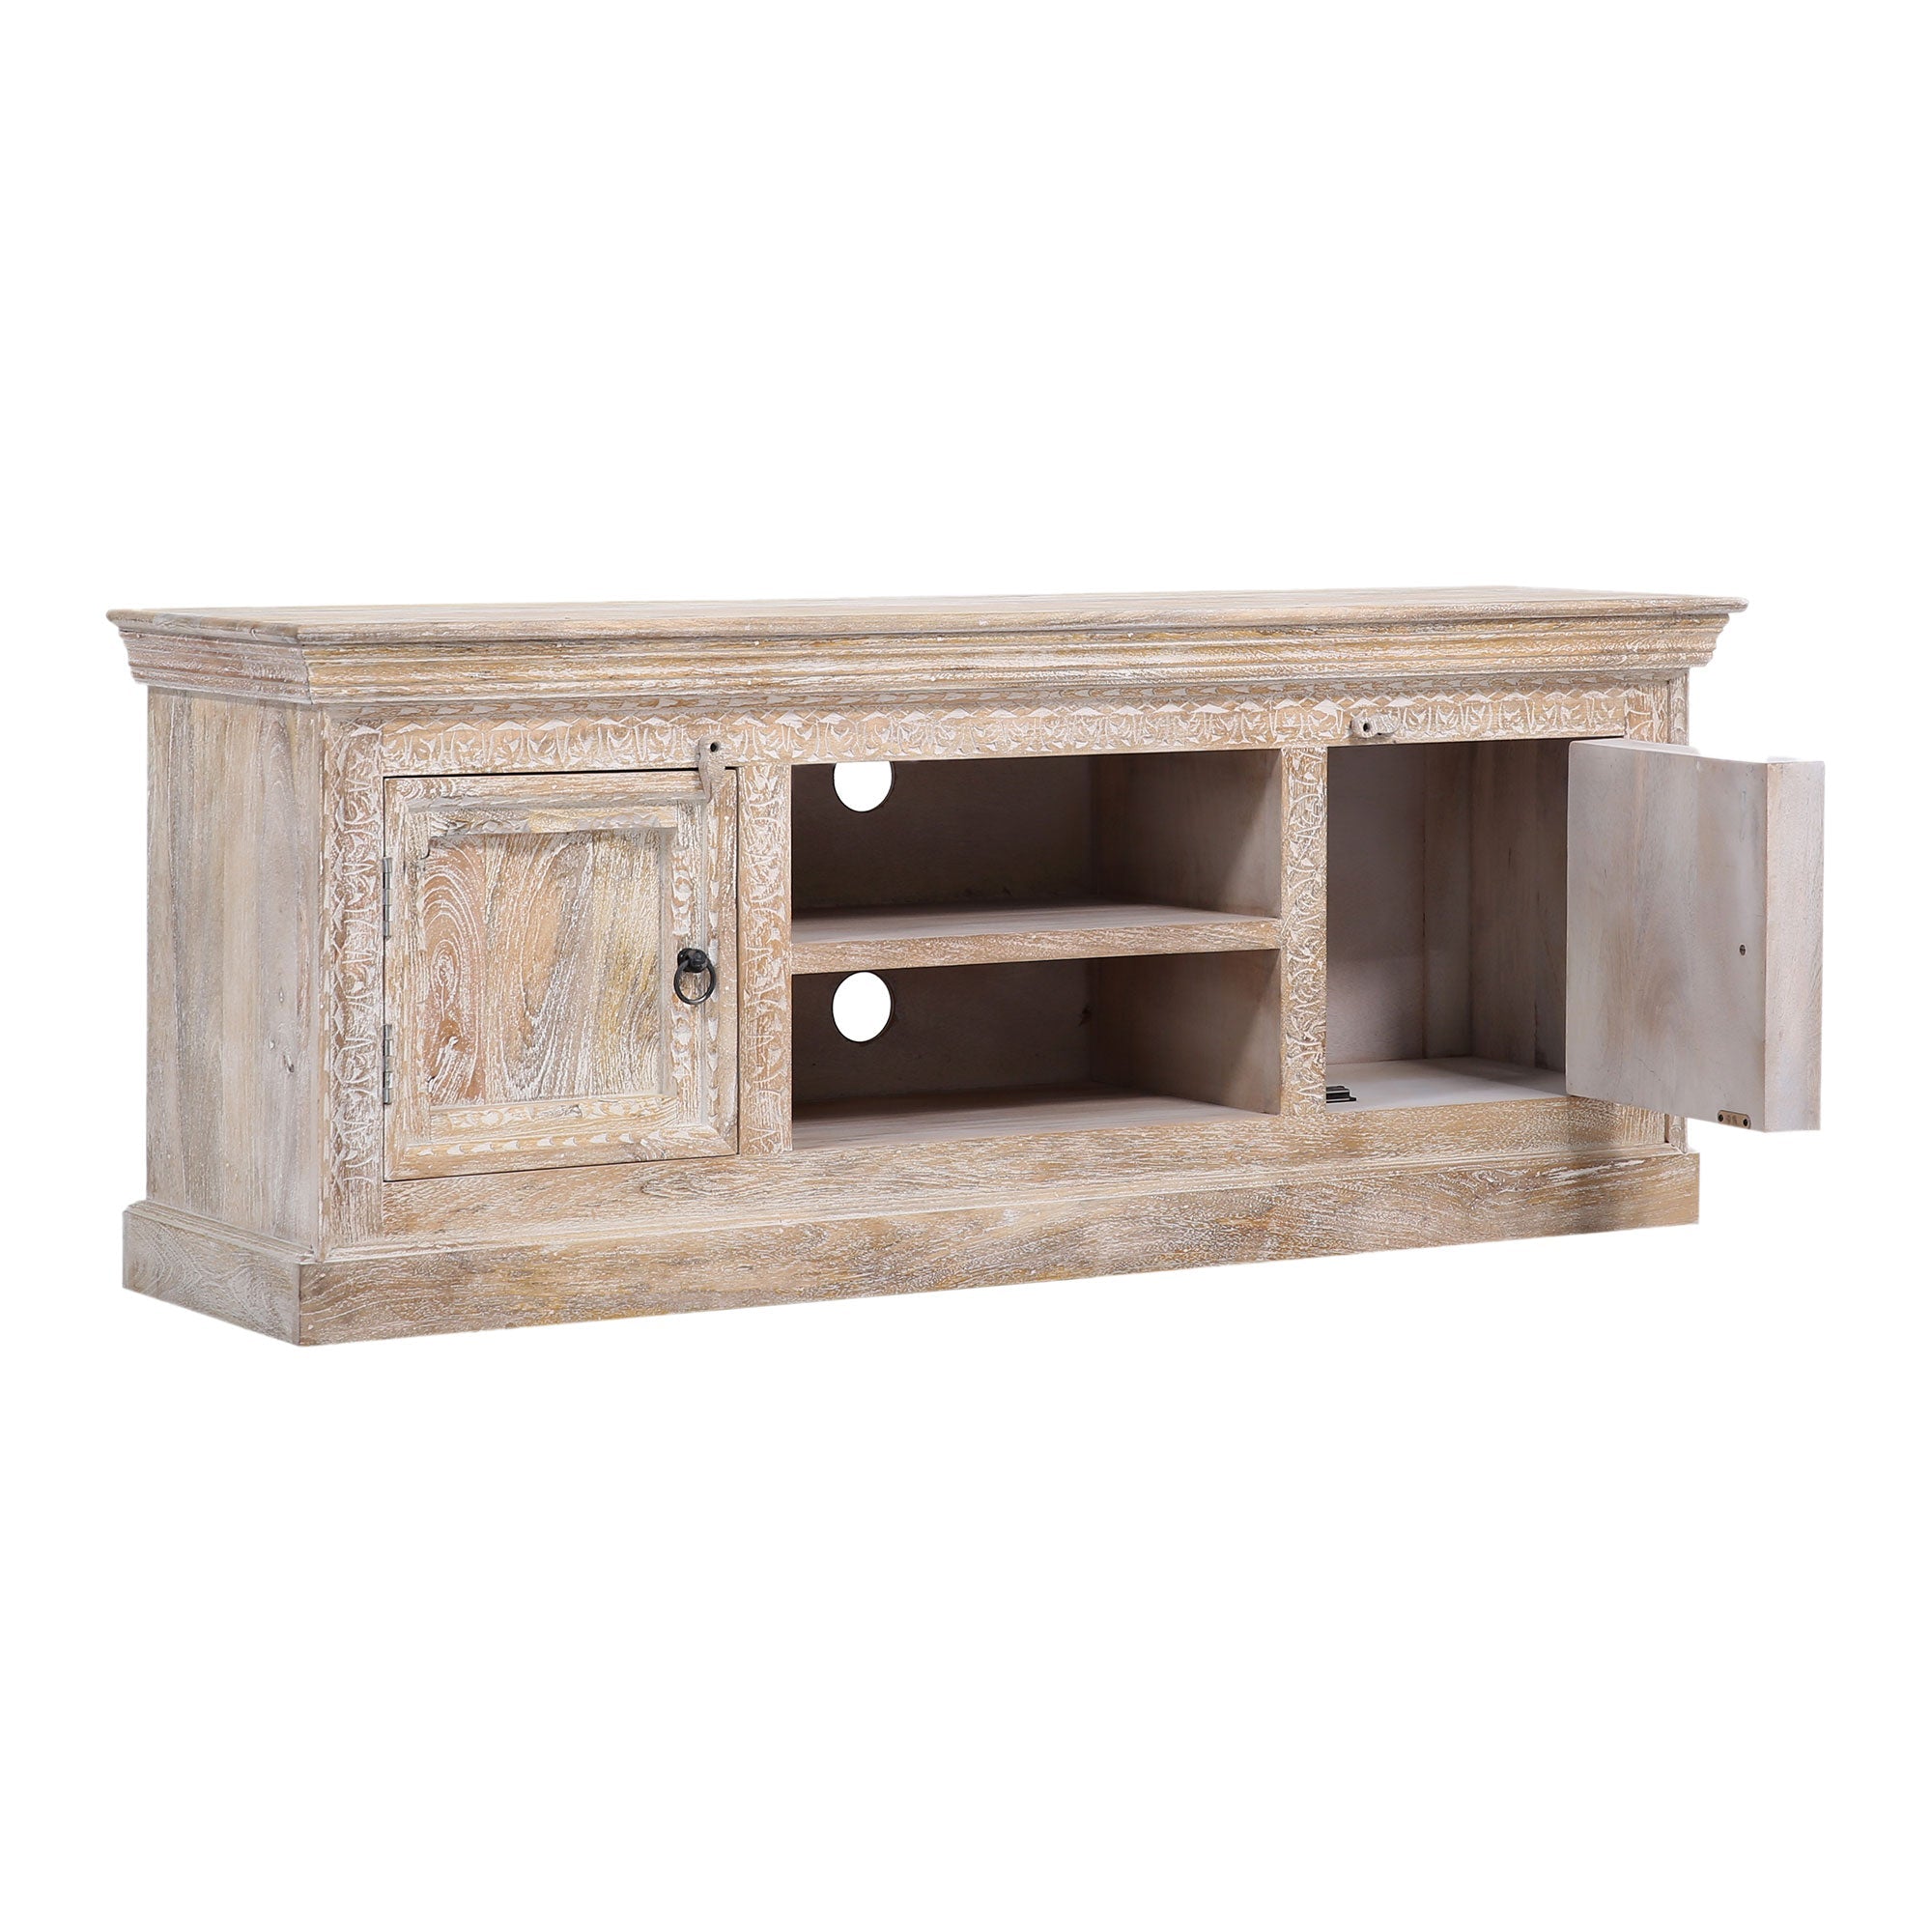 Mahala Nomad Wooden Media Unit in Distressed Natural Finish in Media Units by VMInnovations